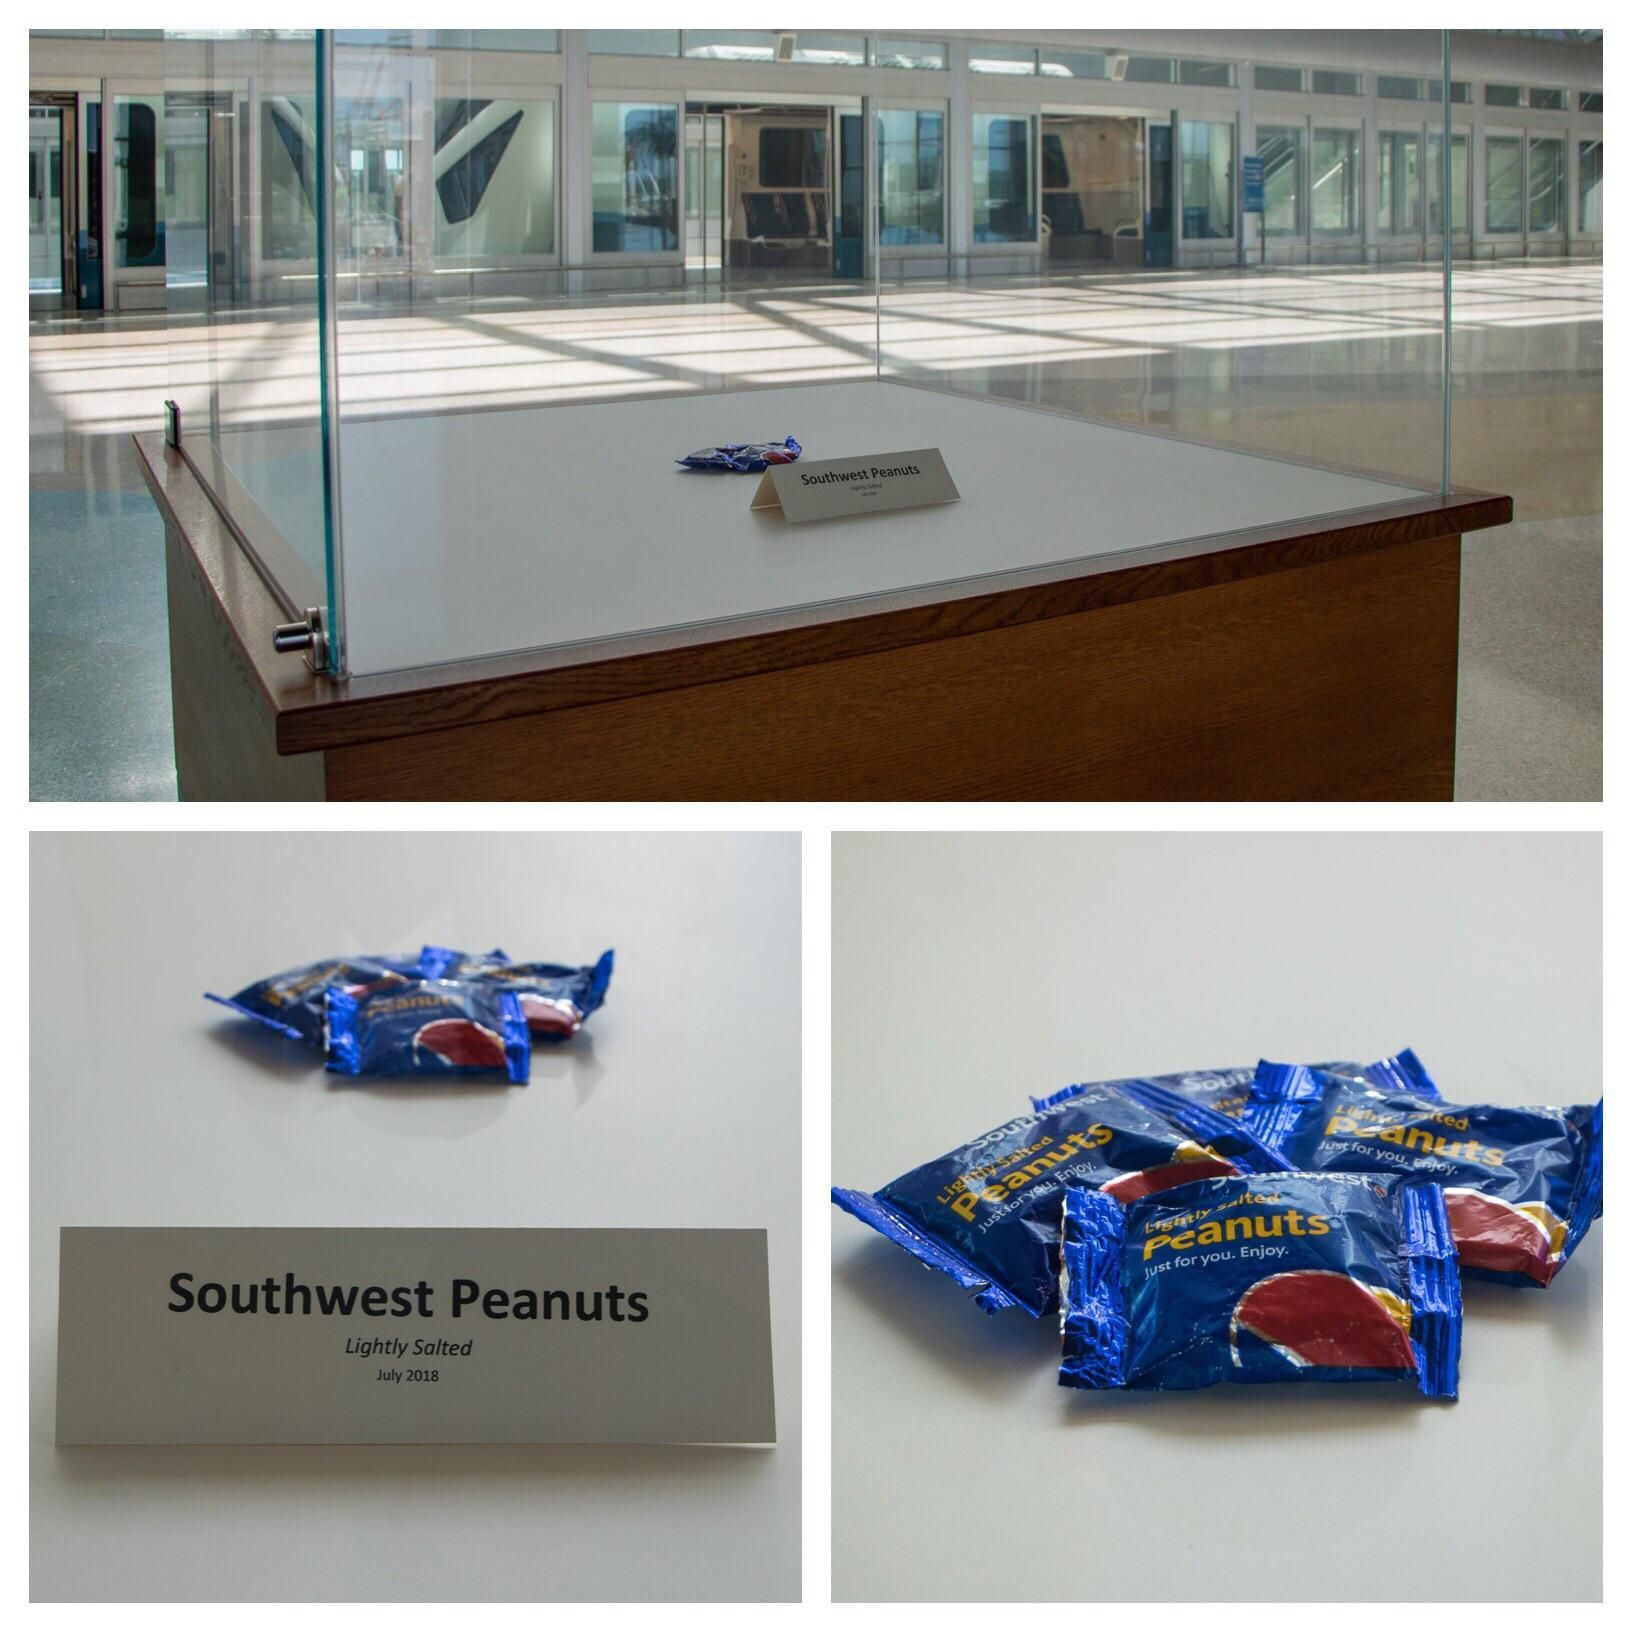 In honor of the anniversary of the last bag of peanuts offered on a Southwest flight, Orlando International Airport set up this exhibit to honor a relic of airplane food history